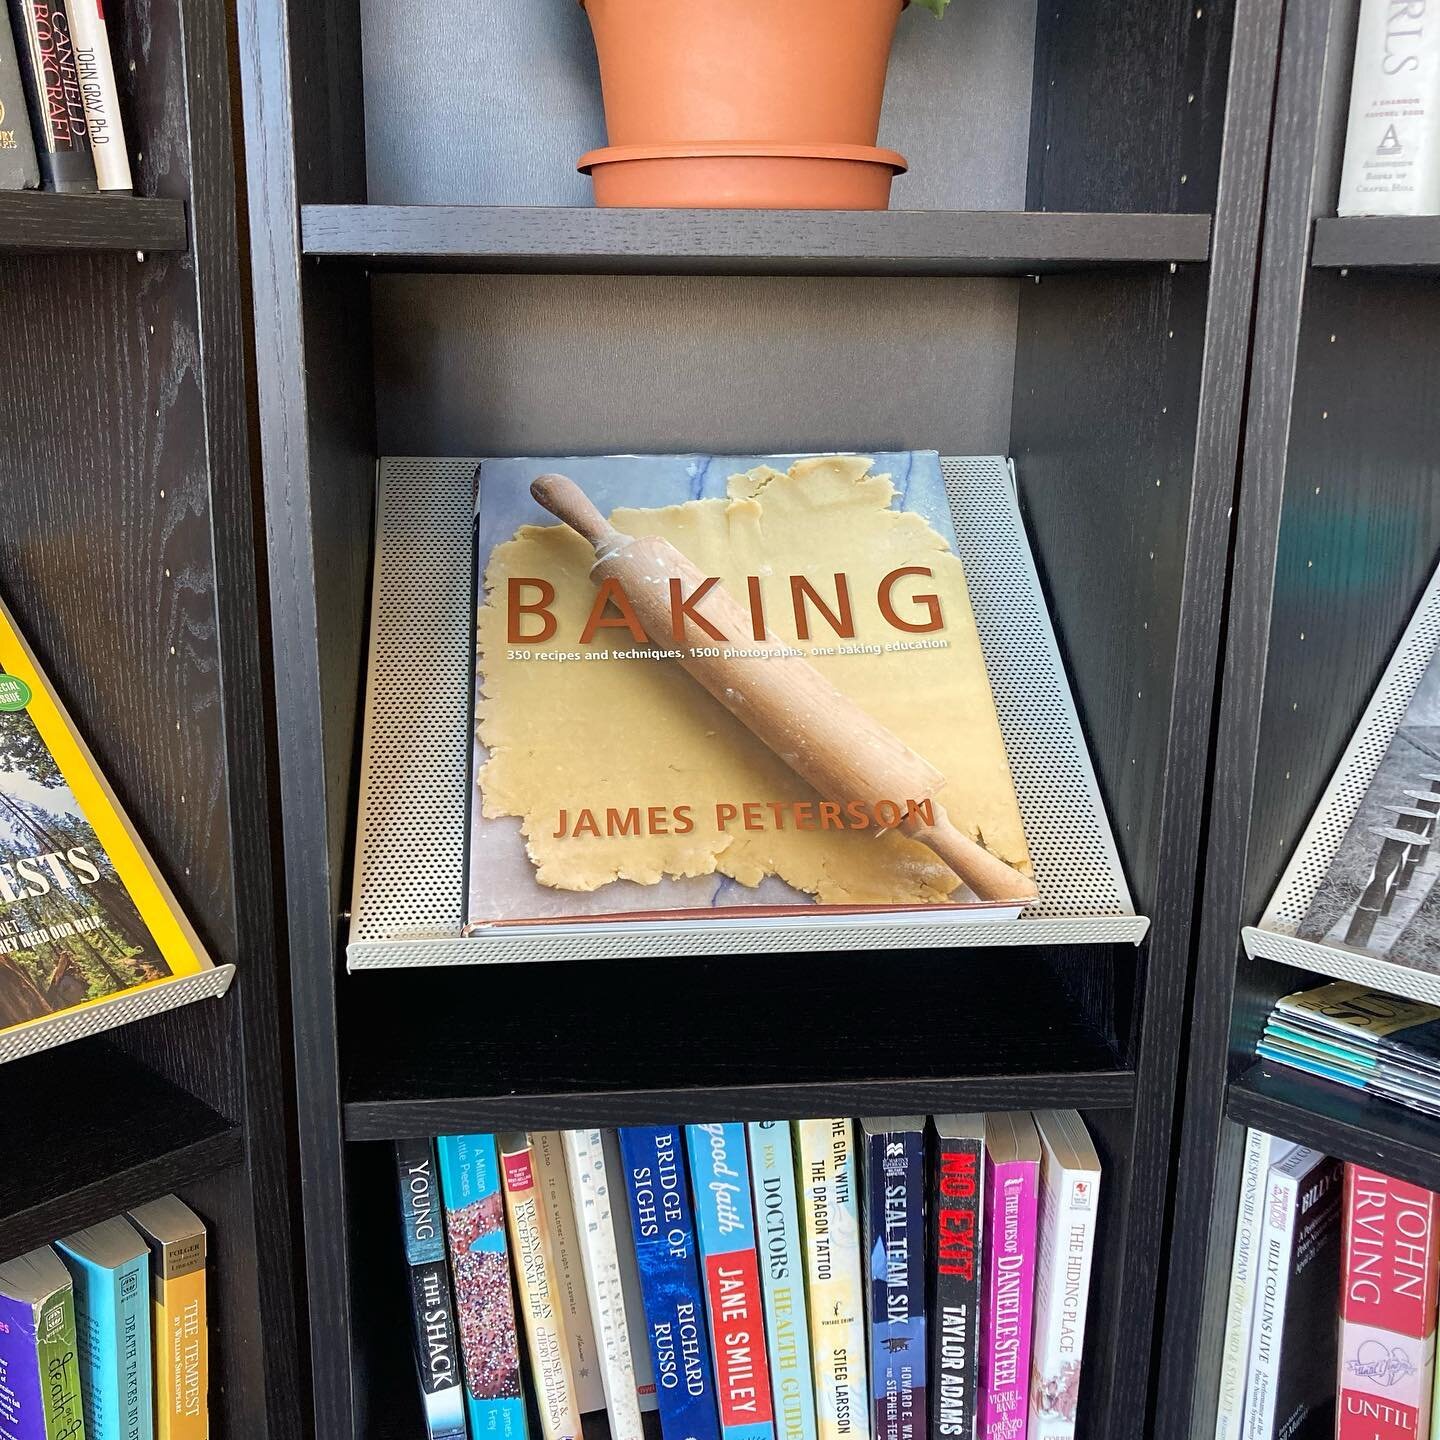 Happy Monday! As fall settles in, we look forward to cozy evenings indoors. So for our weekly Little Free Library highlight we are featuring the James Peterson Baking book!